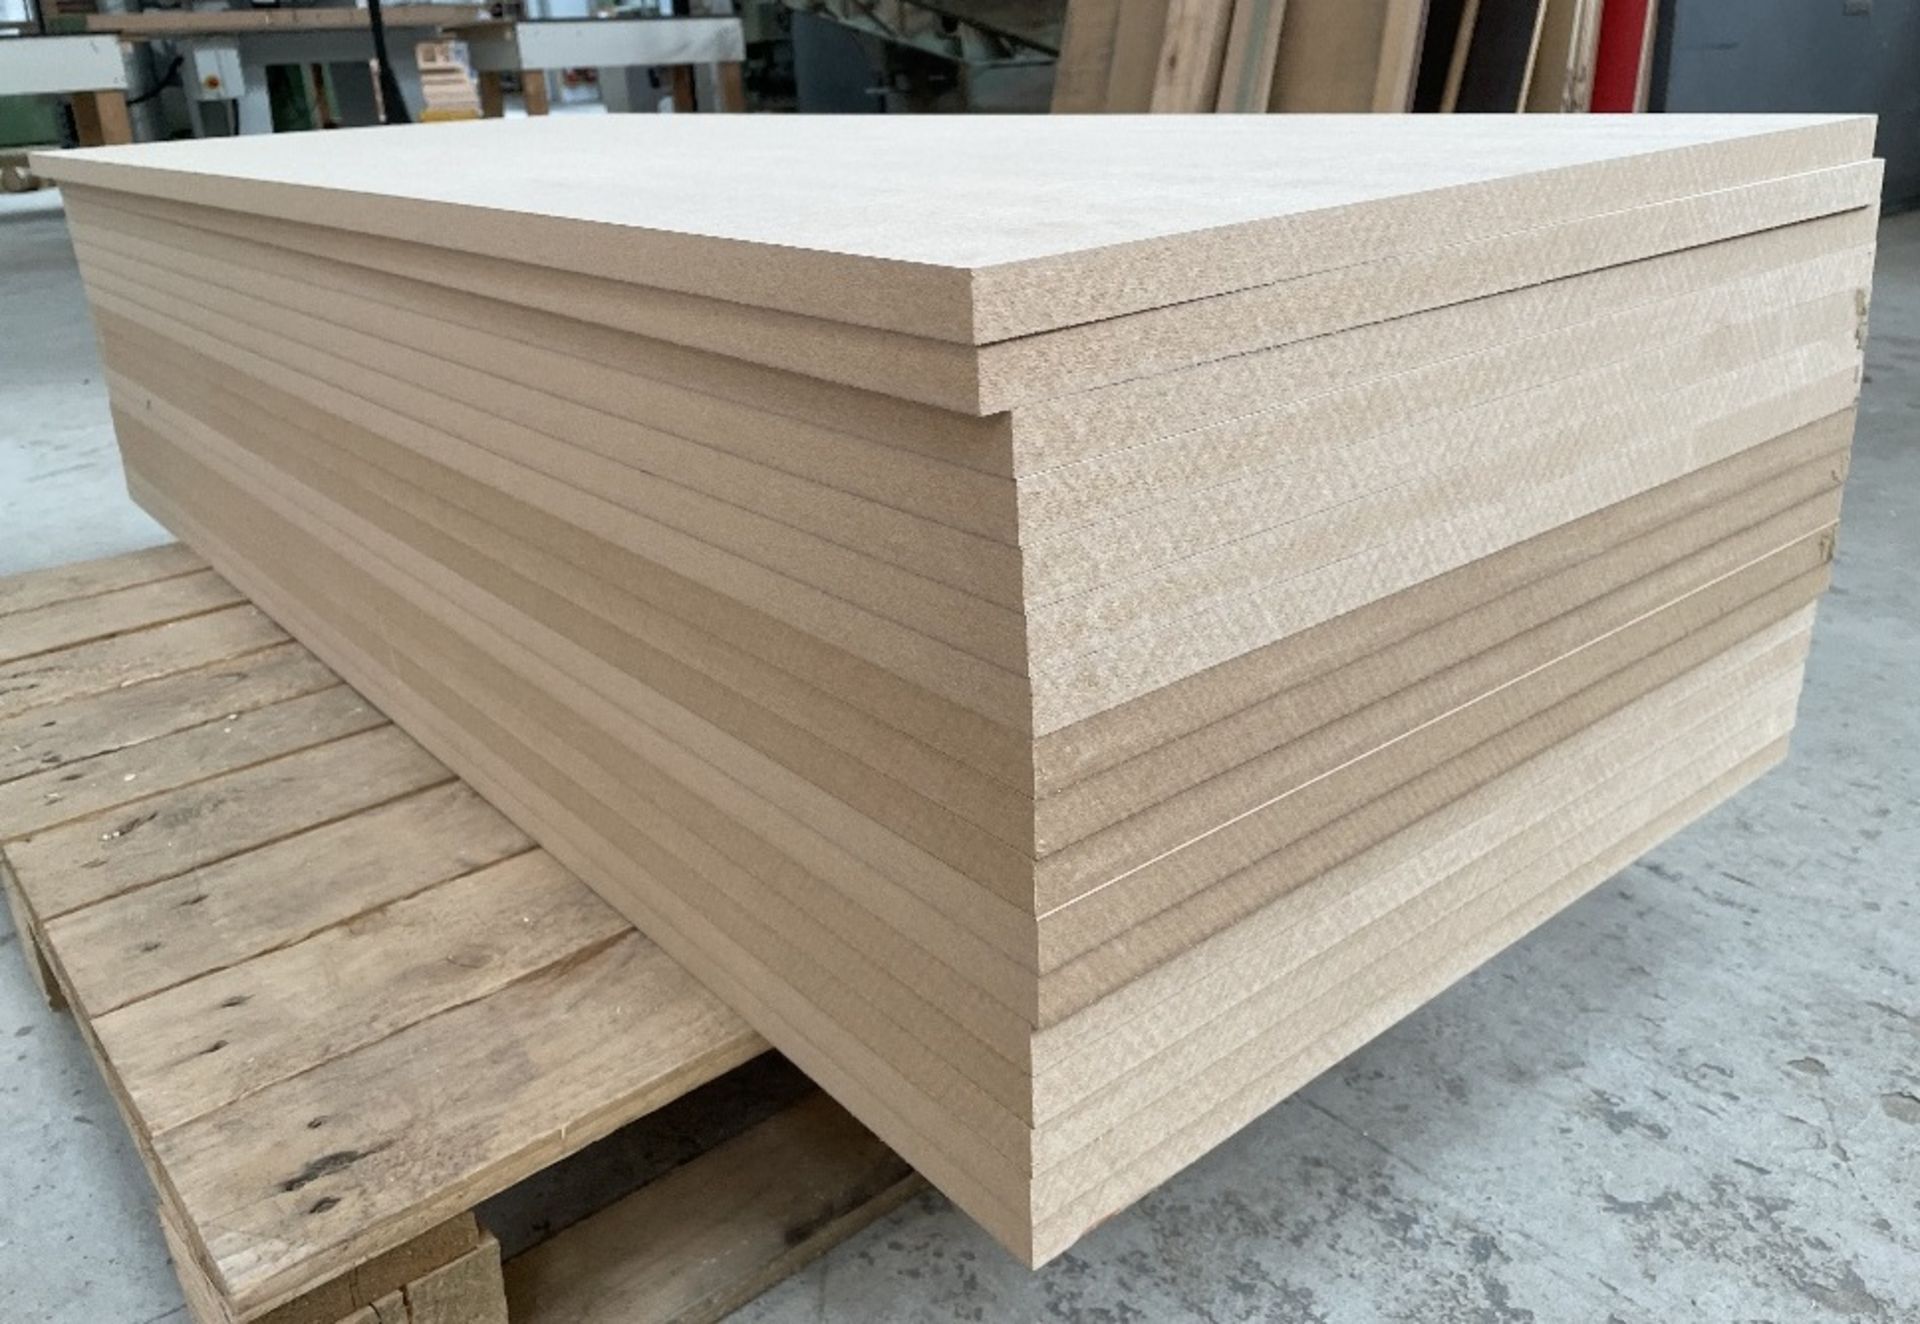 17 x Sheets of MDF | Size: 1520 x 630 x 22mm - Image 5 of 5